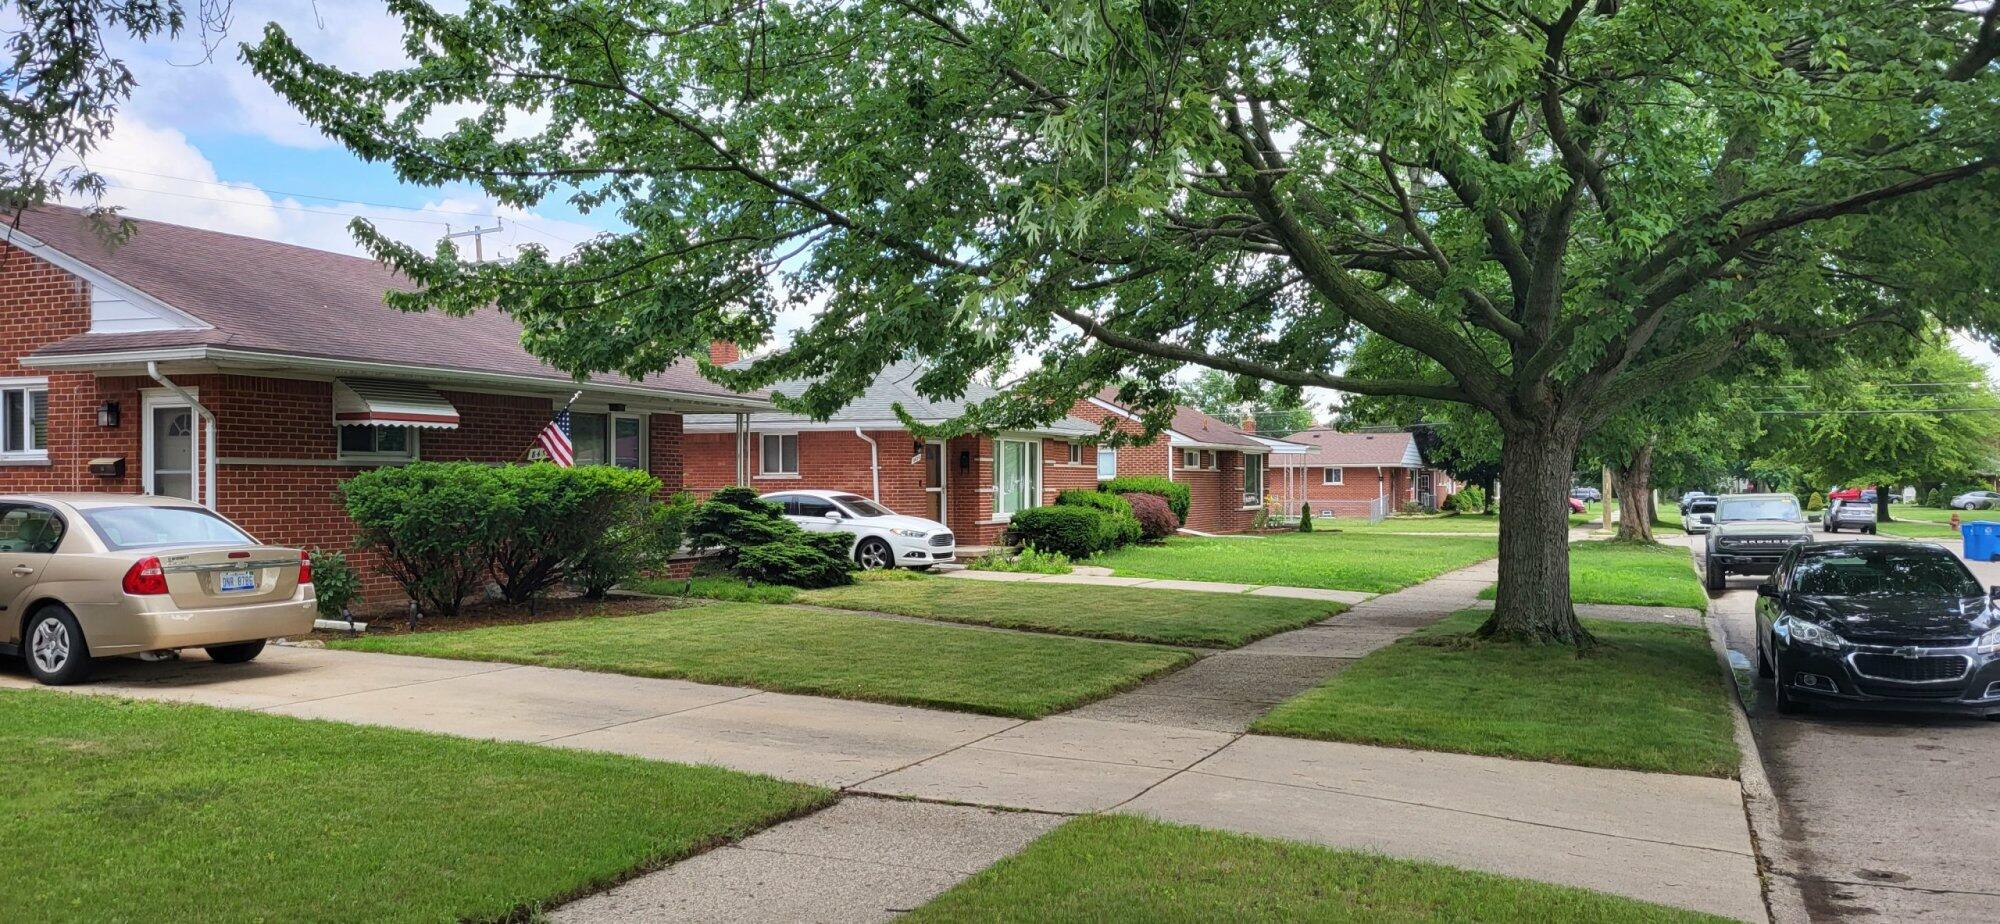 Picture of a typical Dearborn Heights Subdivision